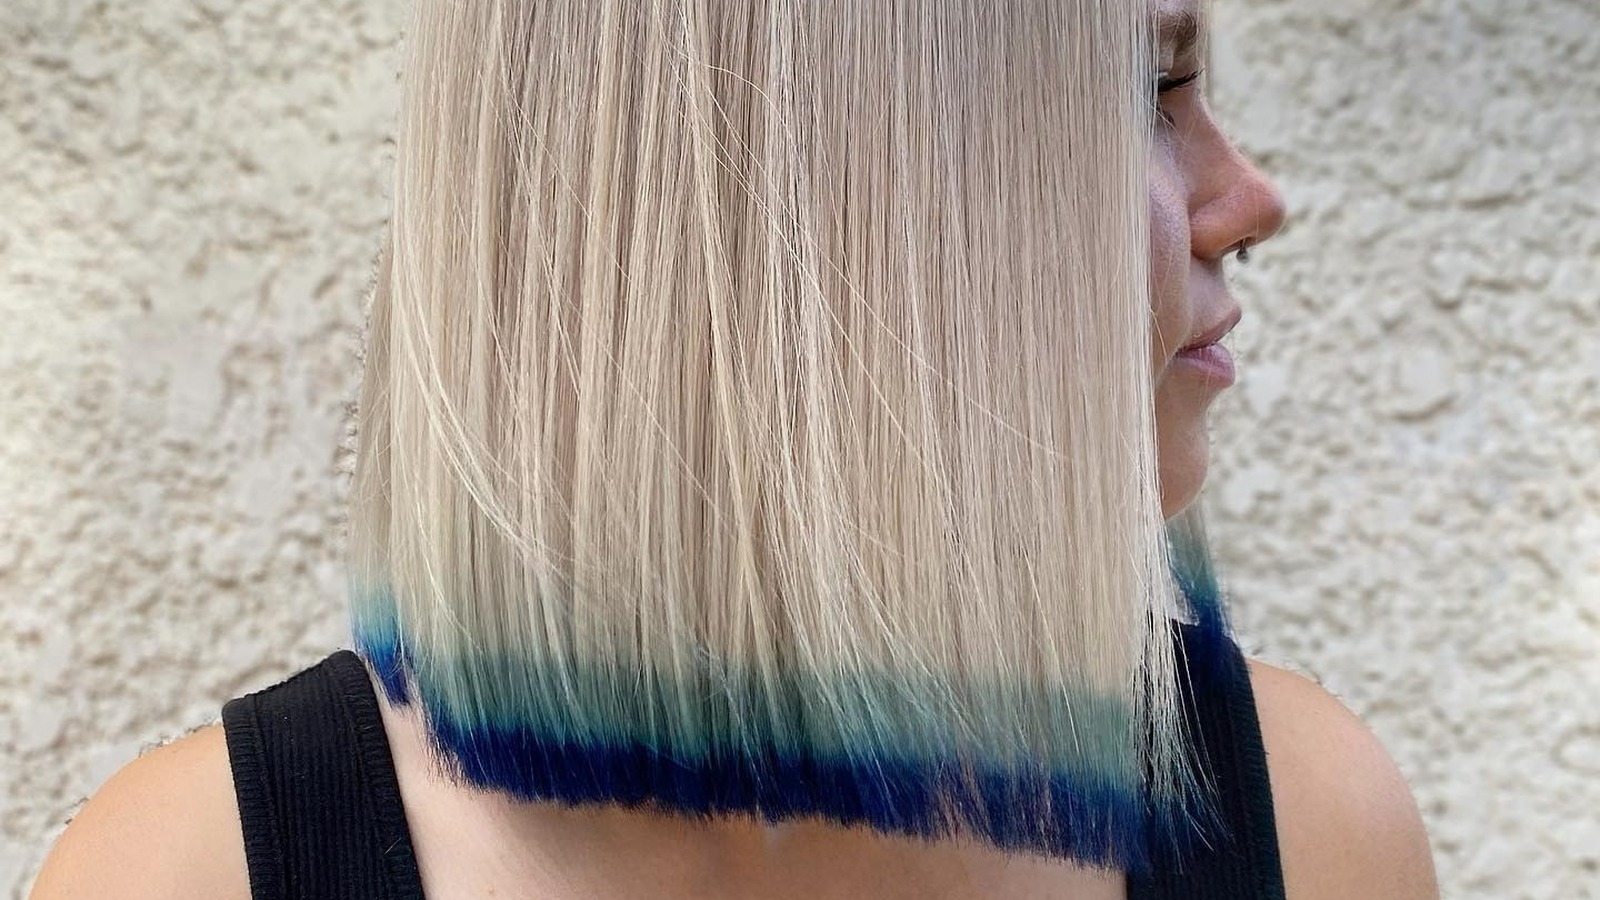 1. "How to Achieve a Stunning Dip Dye Look on Short Blue Hair" - wide 4